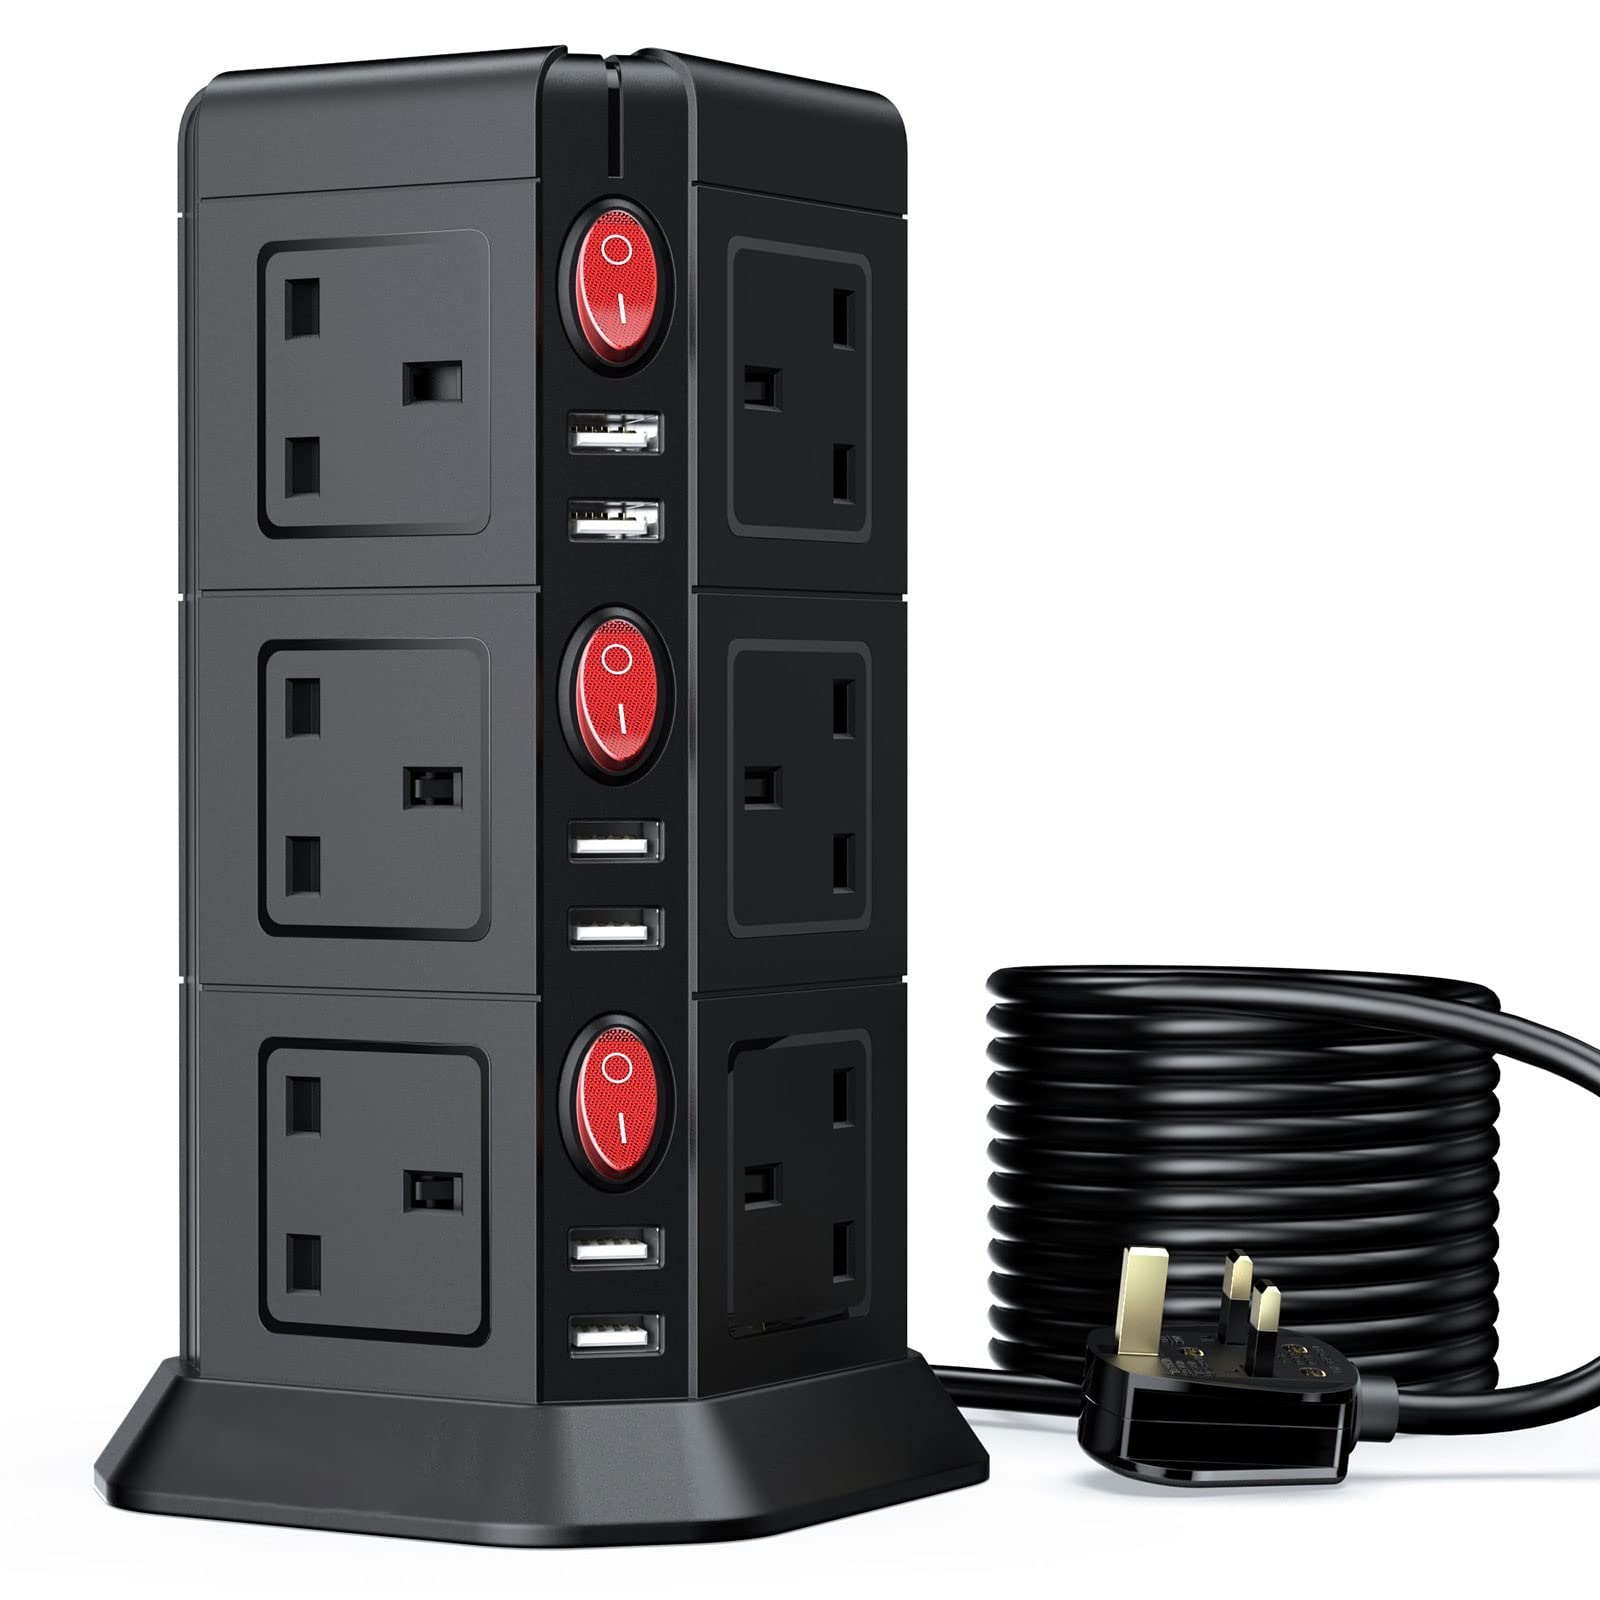 Tower Extension Lead with usb Slots [13A 3250W] Surge Protector - 12 AC Outlets & 6 USB Ports 16.4FT/5M Extension Cords for Home, Office Black